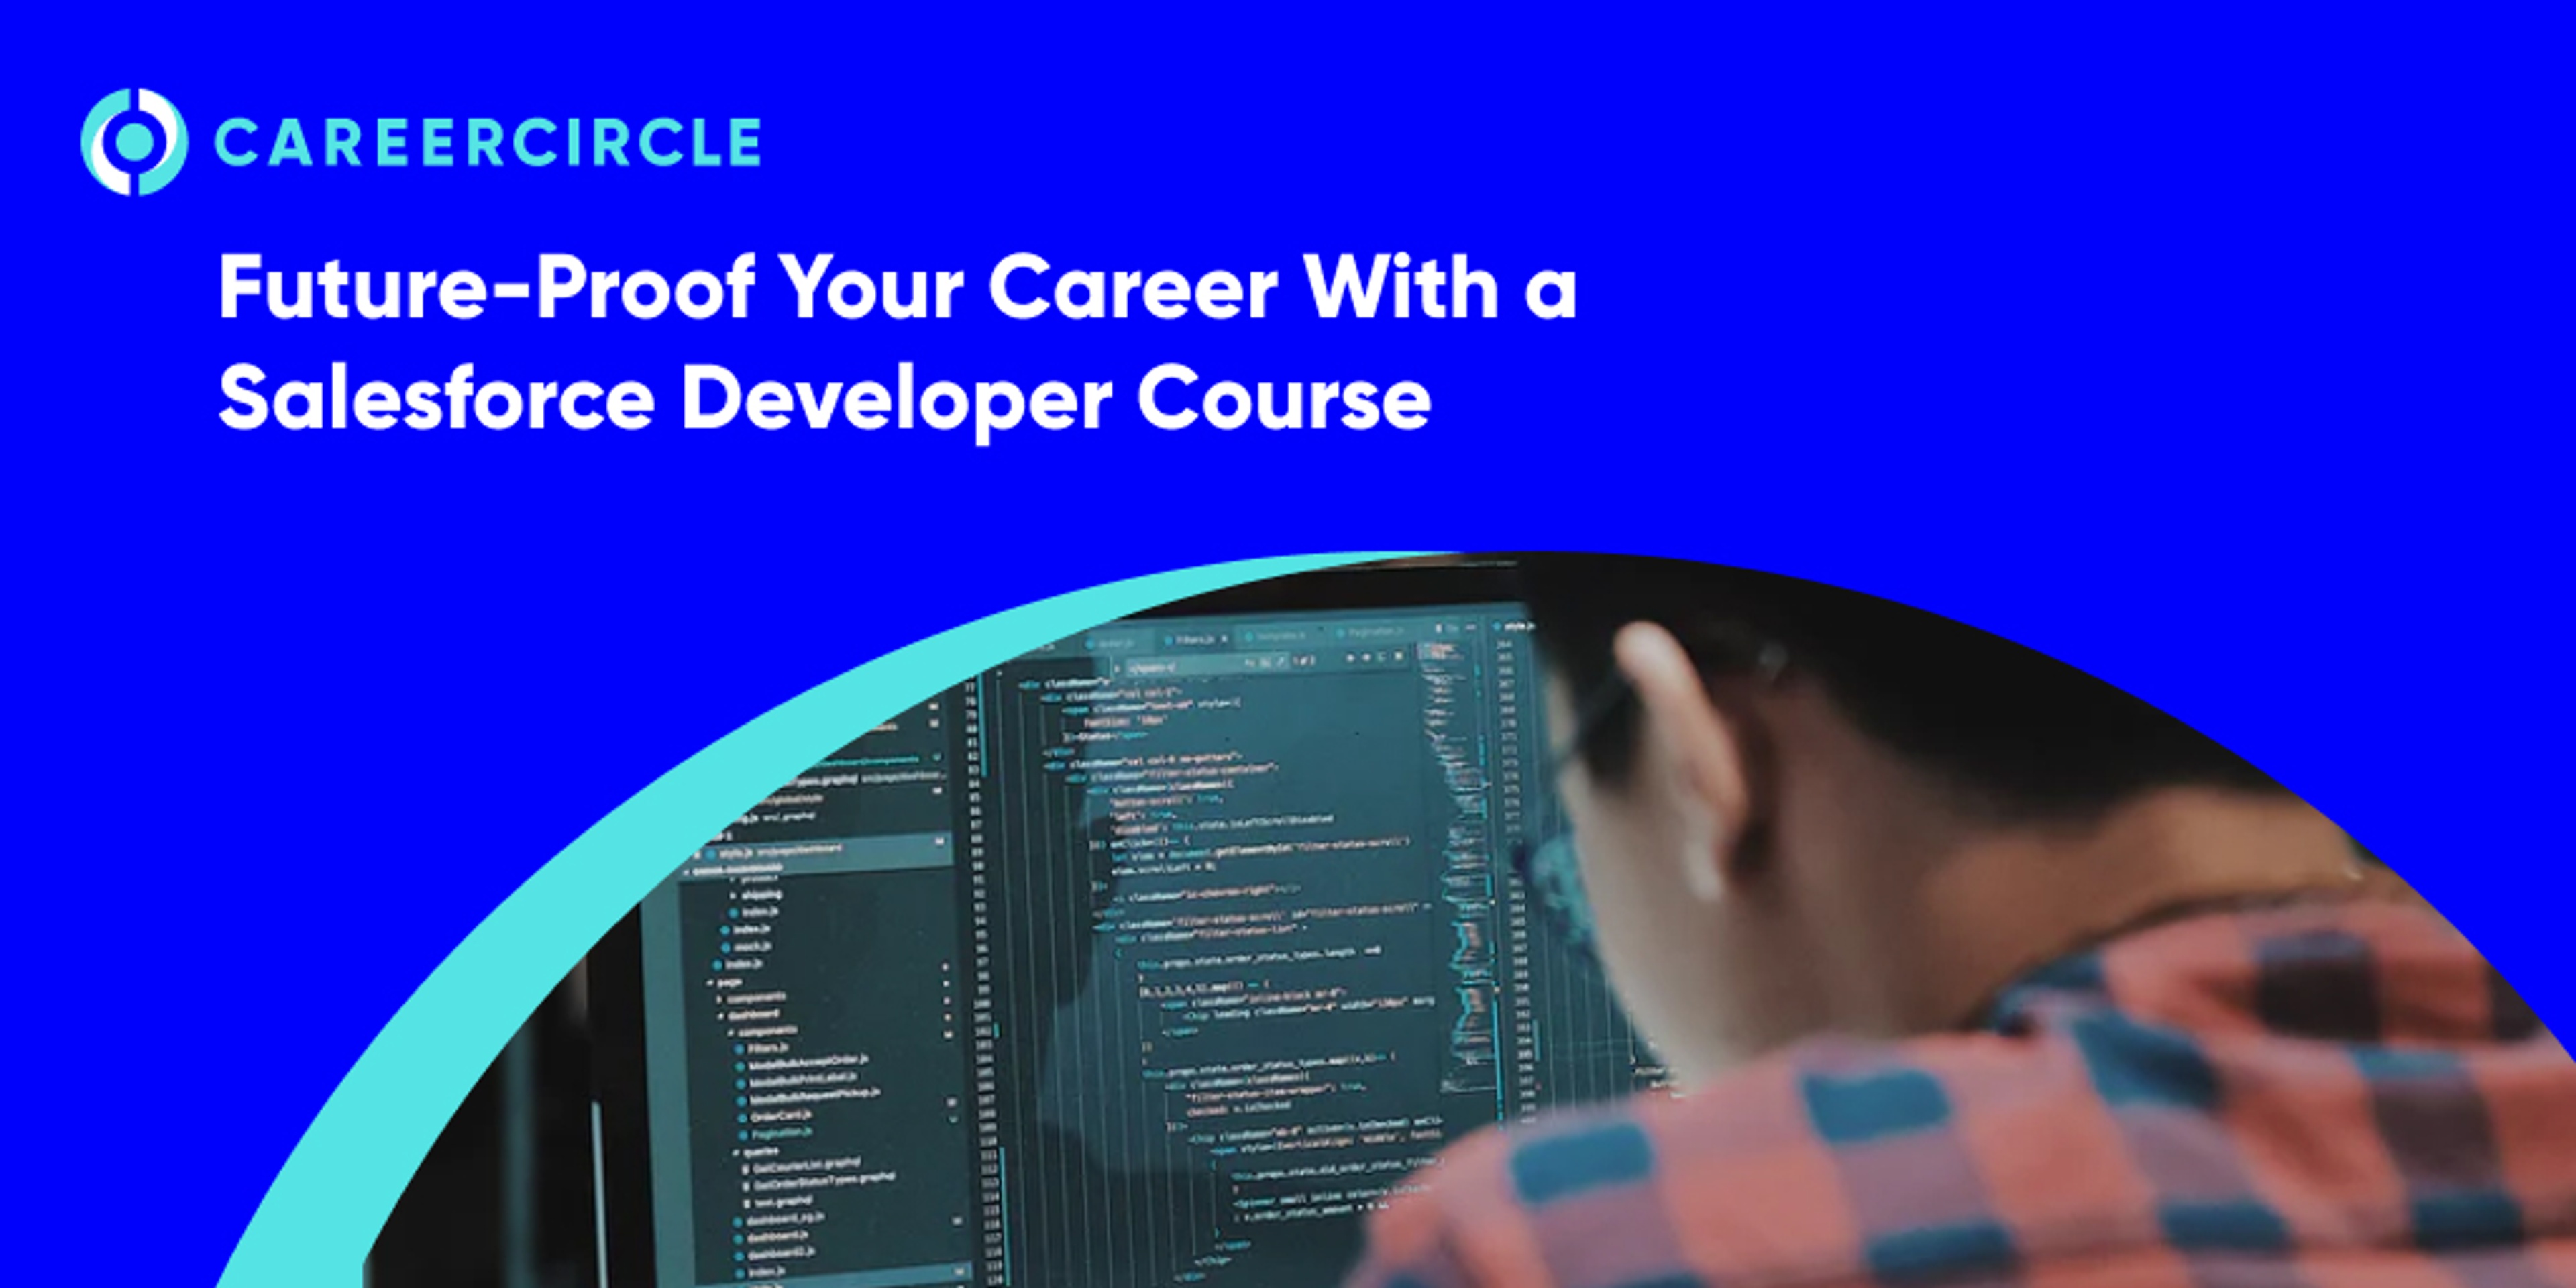 CareerCircle - "Future-Proof Your Career With a Salesforce Developer Course" image of a man coding on his computer